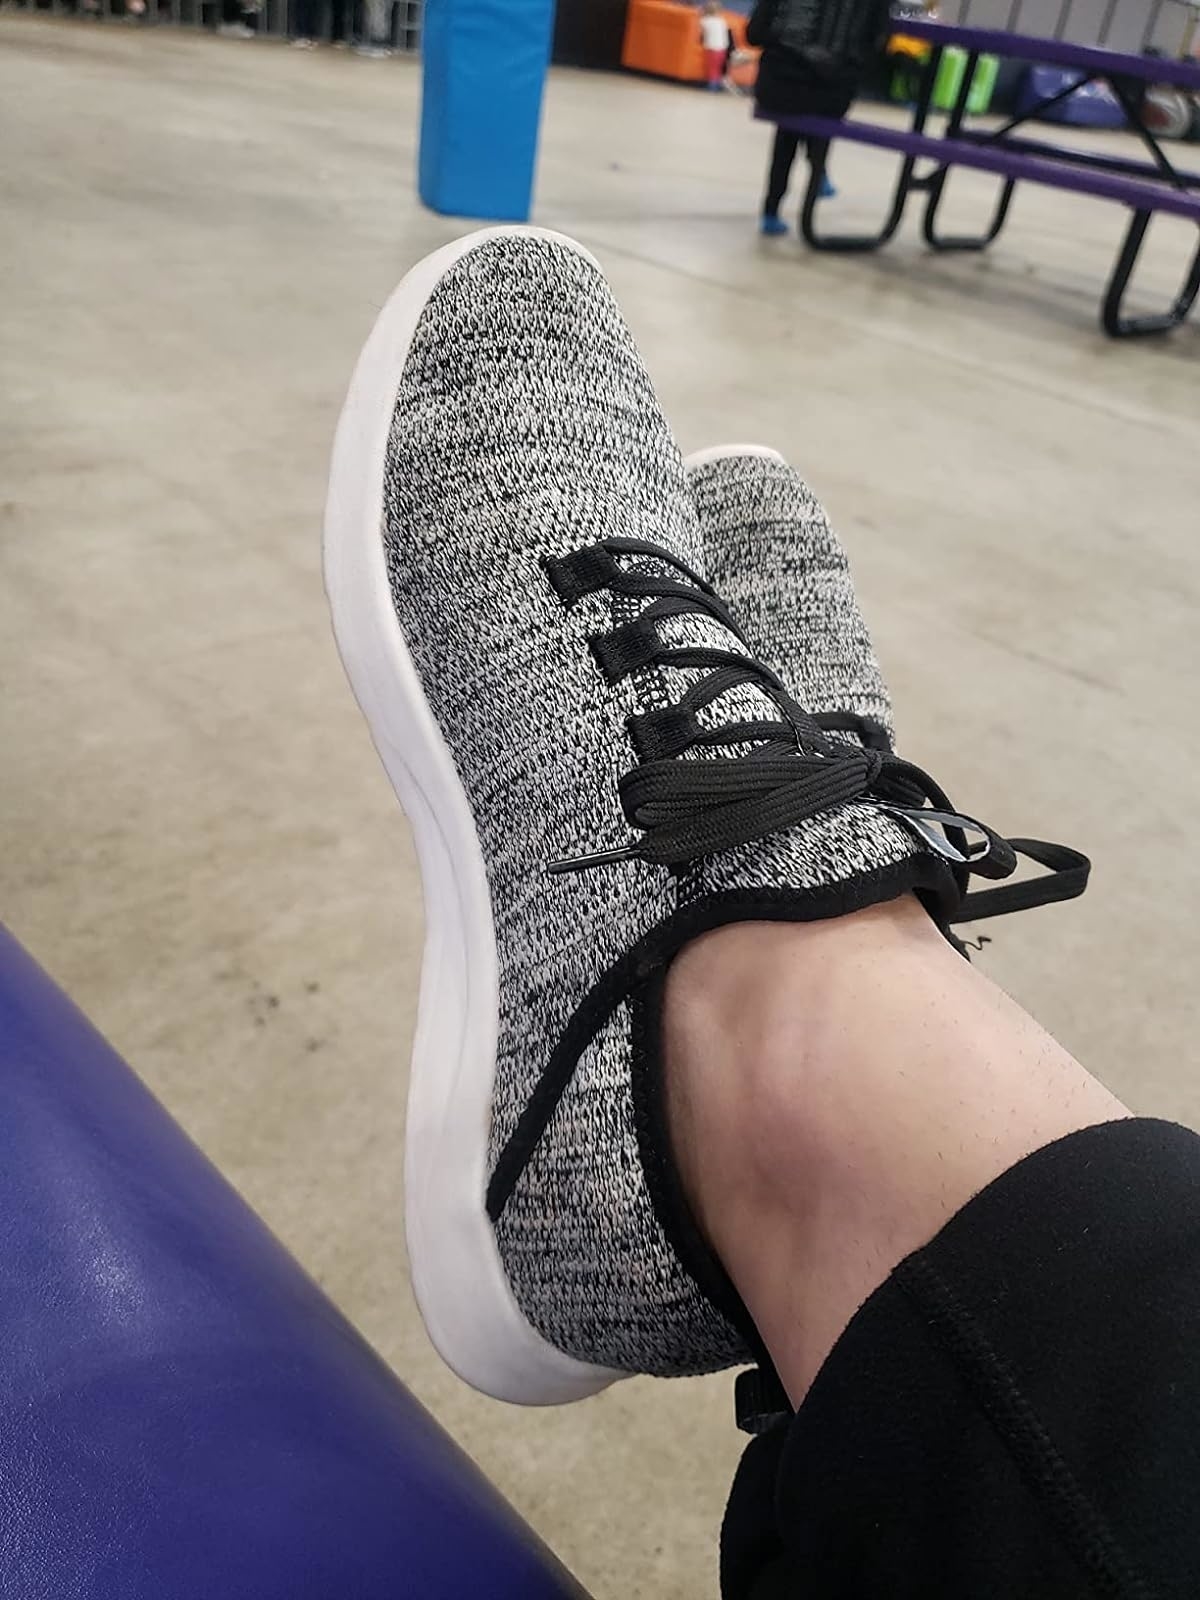 Reviewer&#x27;s photo of their feet wearing the sneakers in the color Black Gray